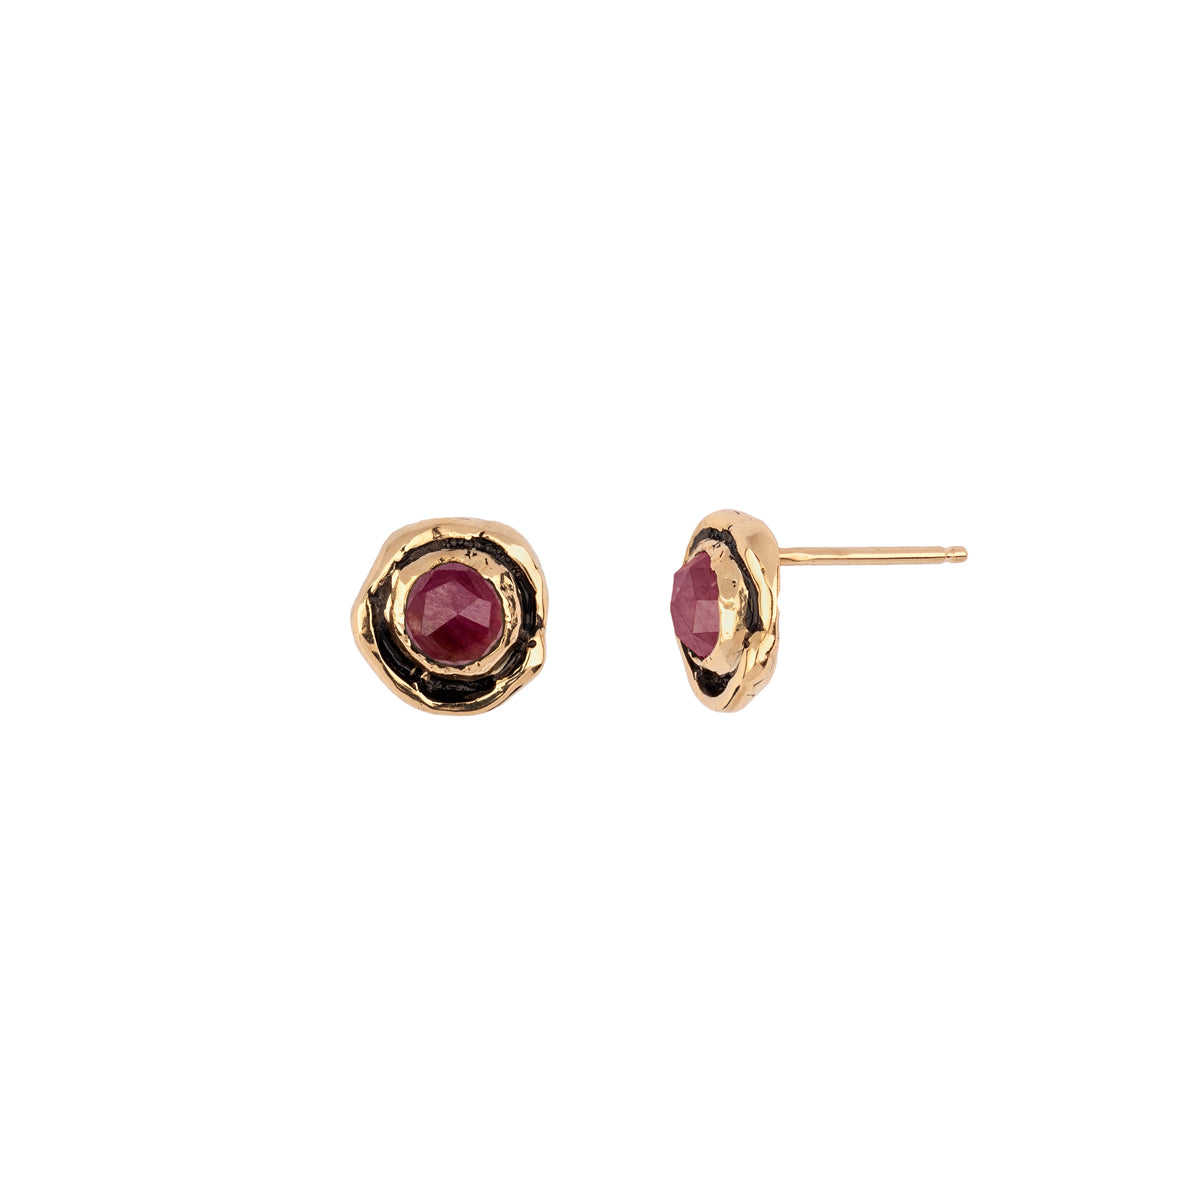 A set of 14k gold stud earrings featuring small rubies.